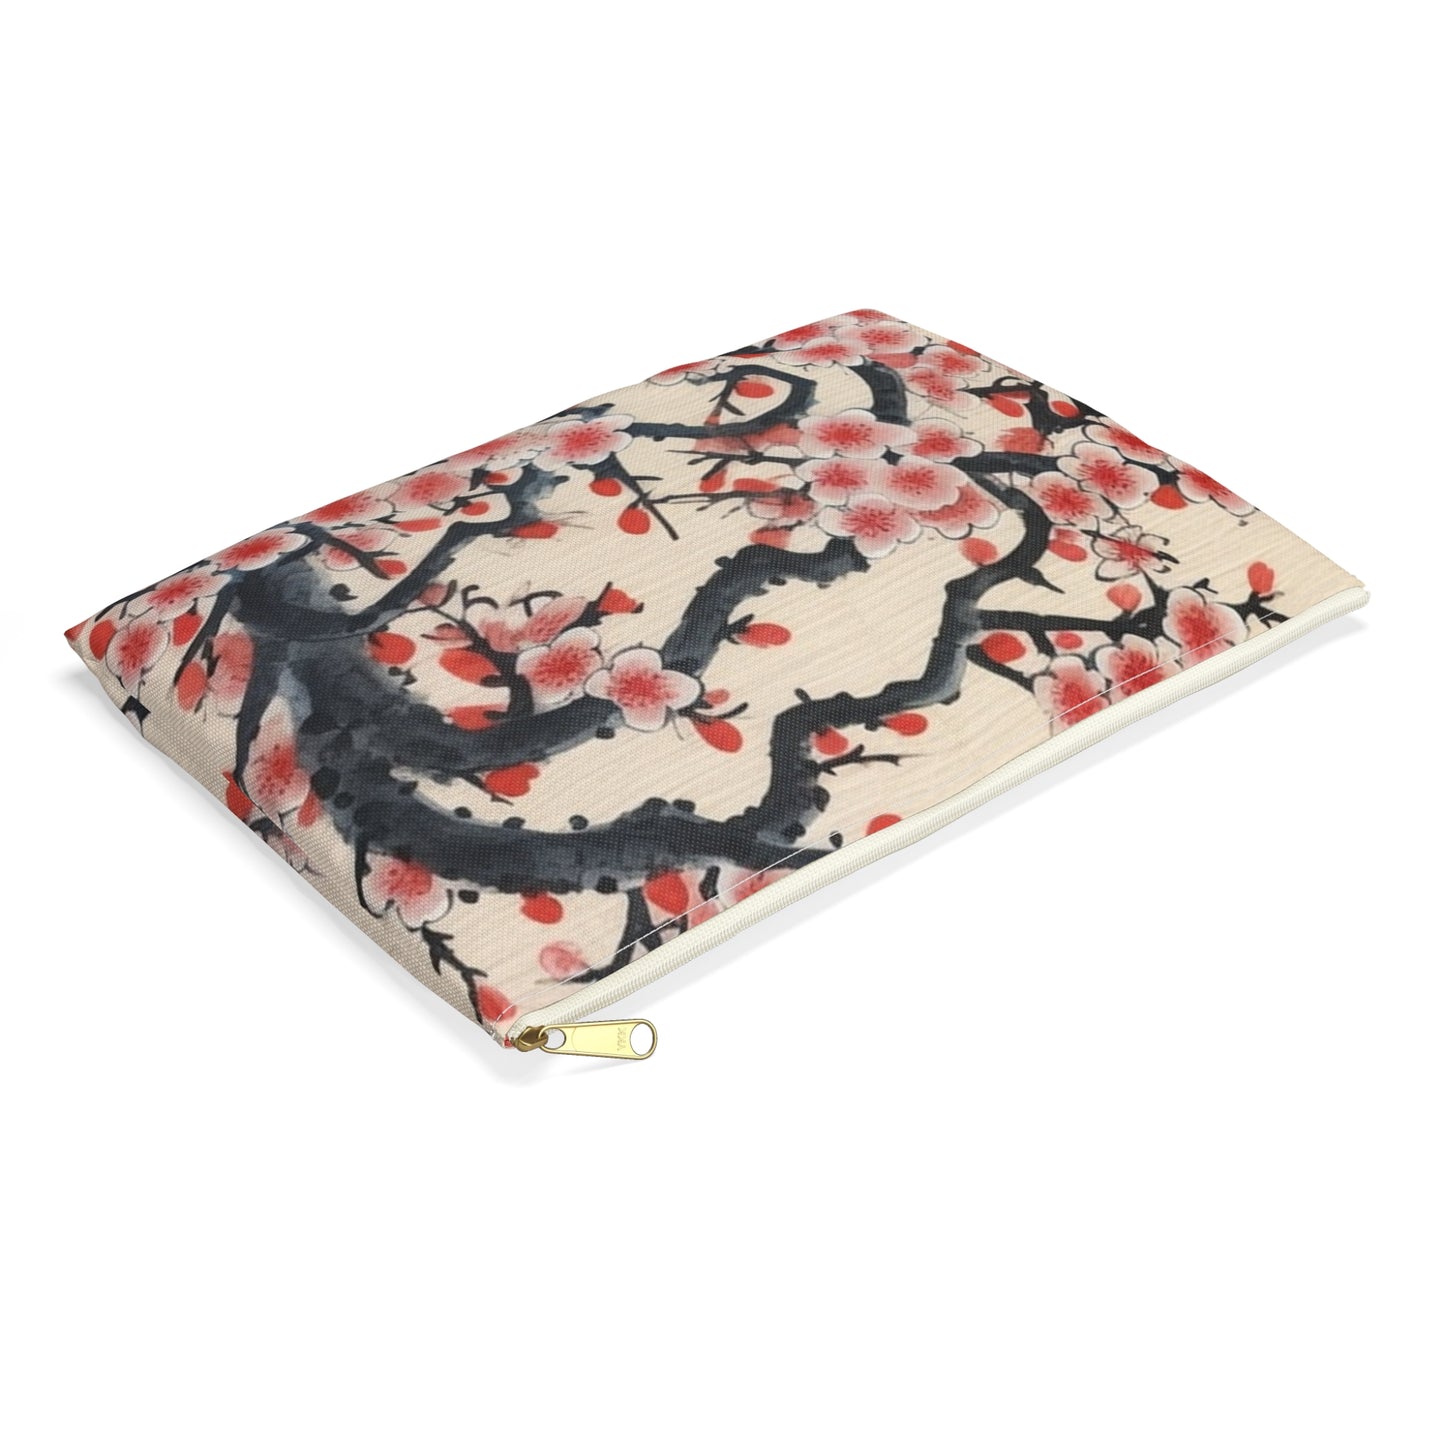 Enchanting Petal Symphony: Accessory Pouch Celebrating Cherry Blossom Tree Drawings